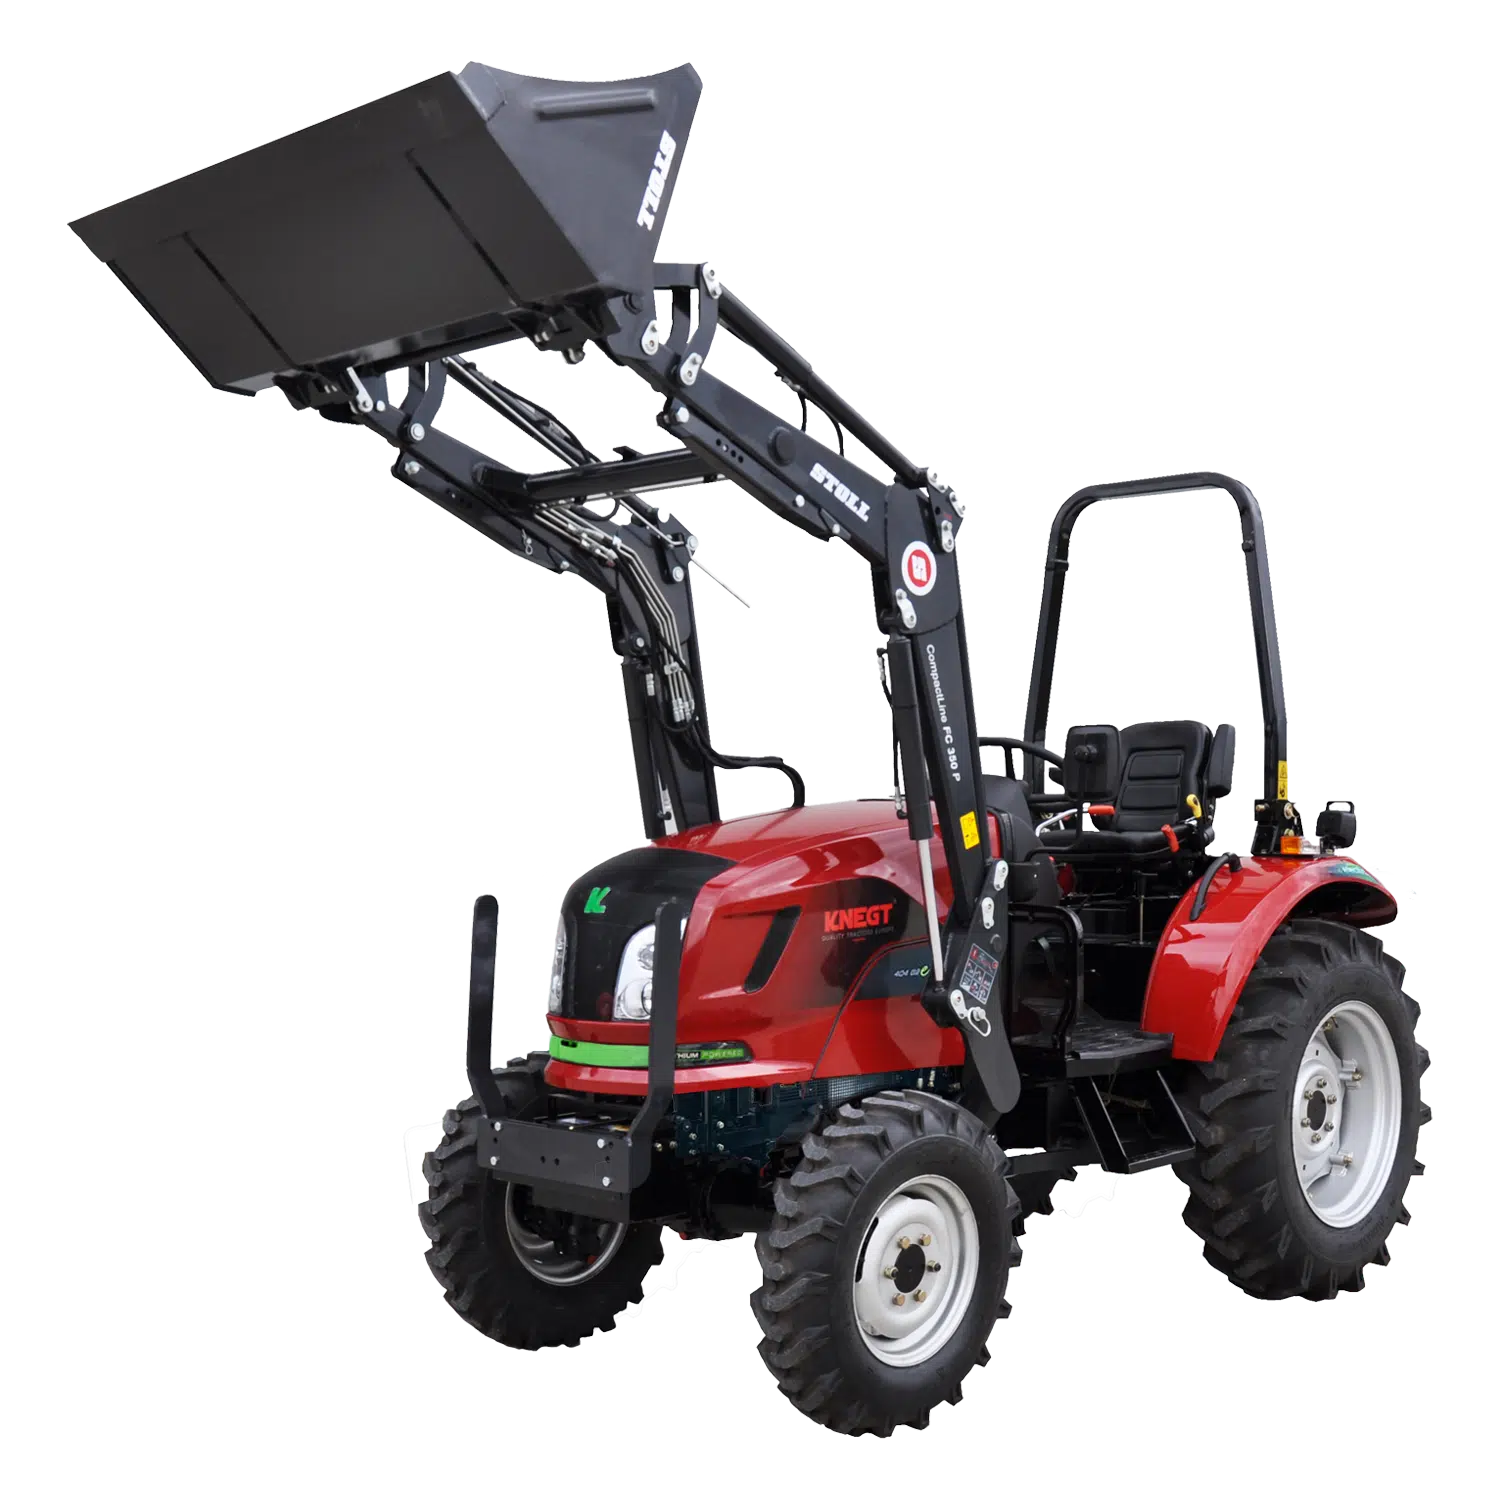 knegt_compact_tractor_404g2E_voorlader_productfoto